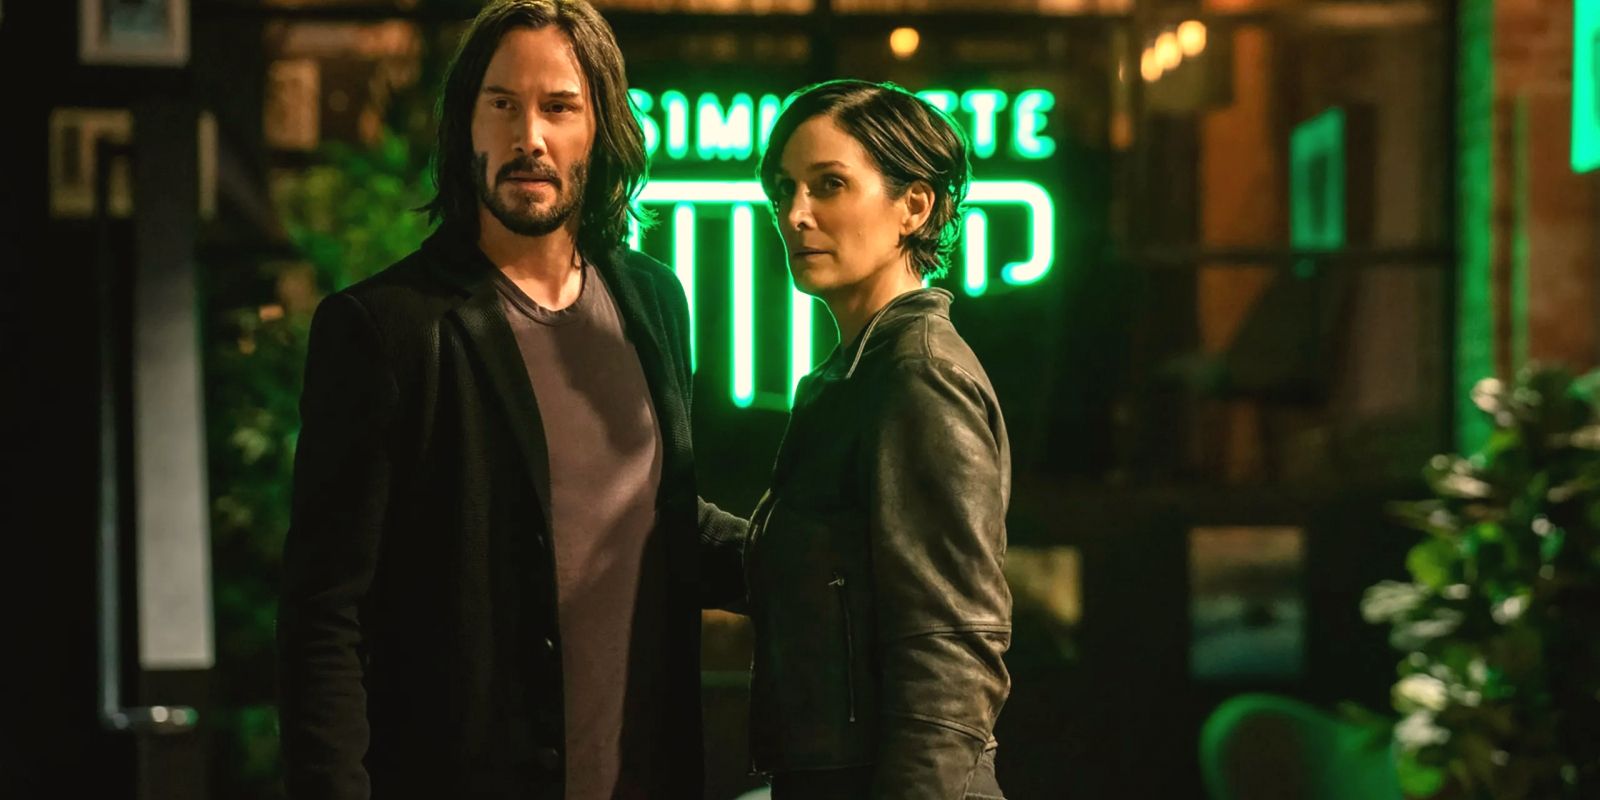 Keanu Reeves and Carrie-Anne Moss as Neo and Trinity looking concerned in The Matrix Resurrections.